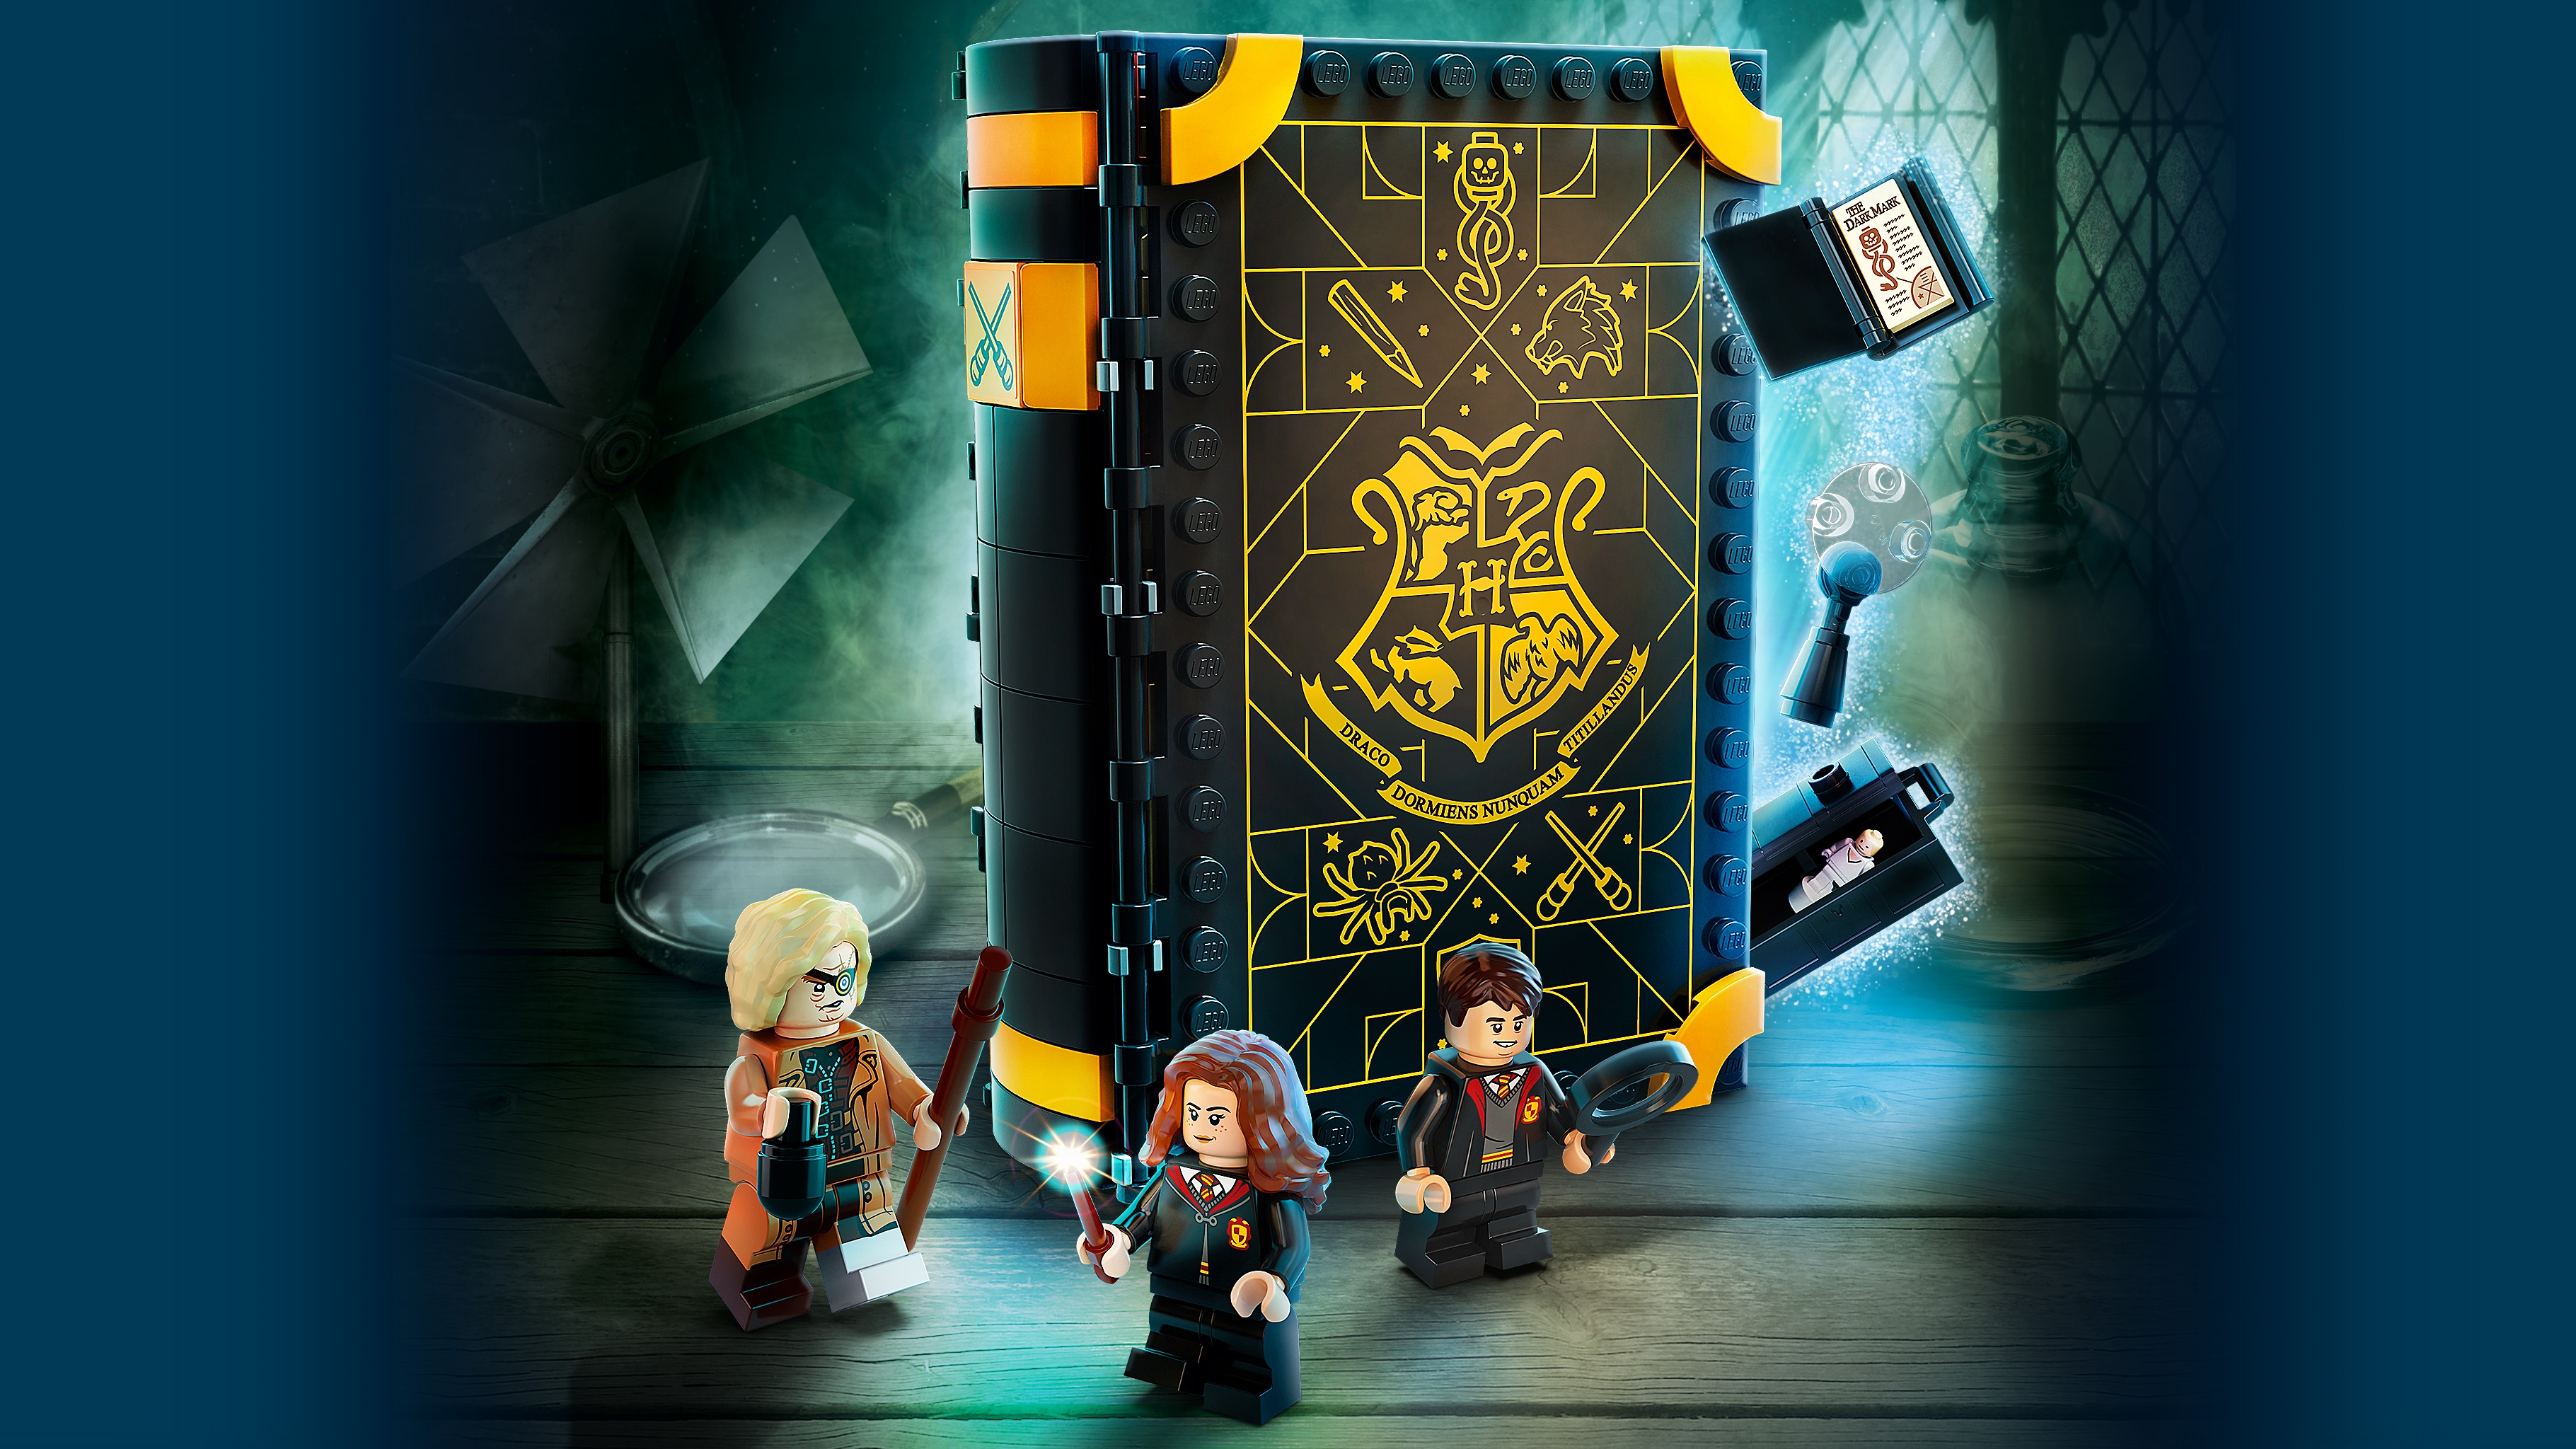 Planned All Along: LEGO Harry Potter: Years 5-7 (Part 1)